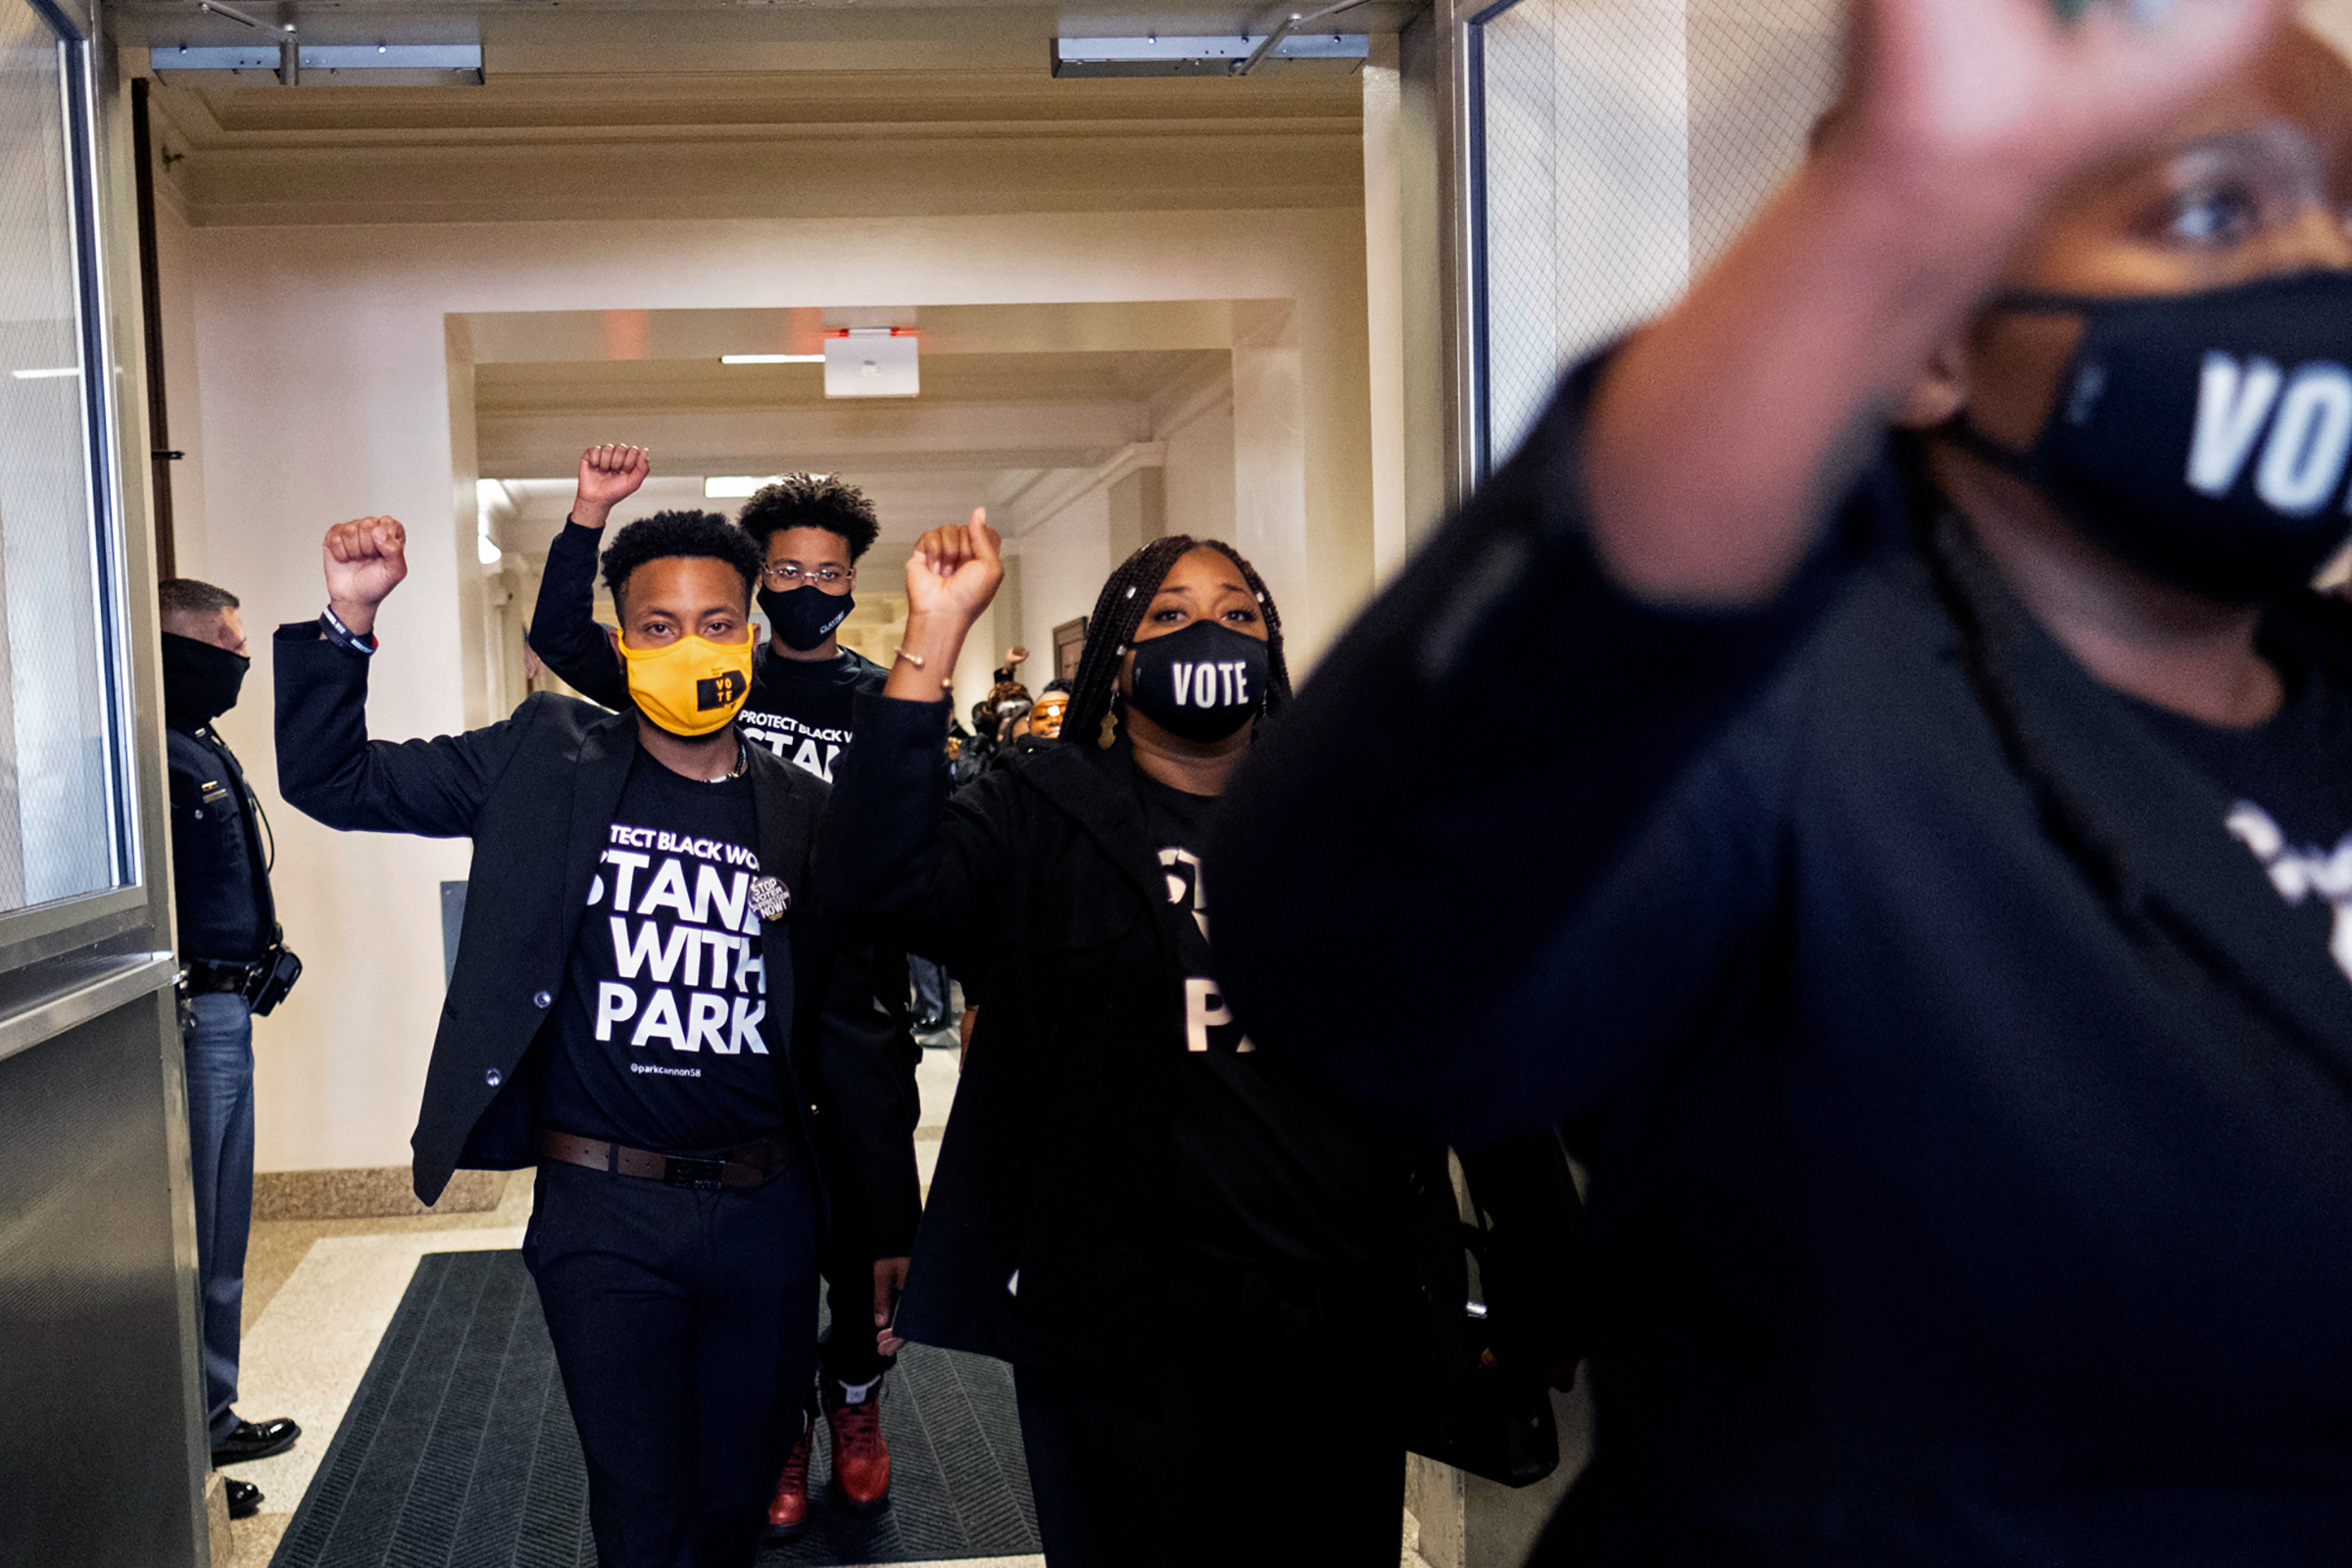 Supporters of Georgia State Rep. Park Cannon leave the State Capitol in Atlanta on Monday morning, March 29, 2021 after escorting her into the building. (Ben Gray—AP)